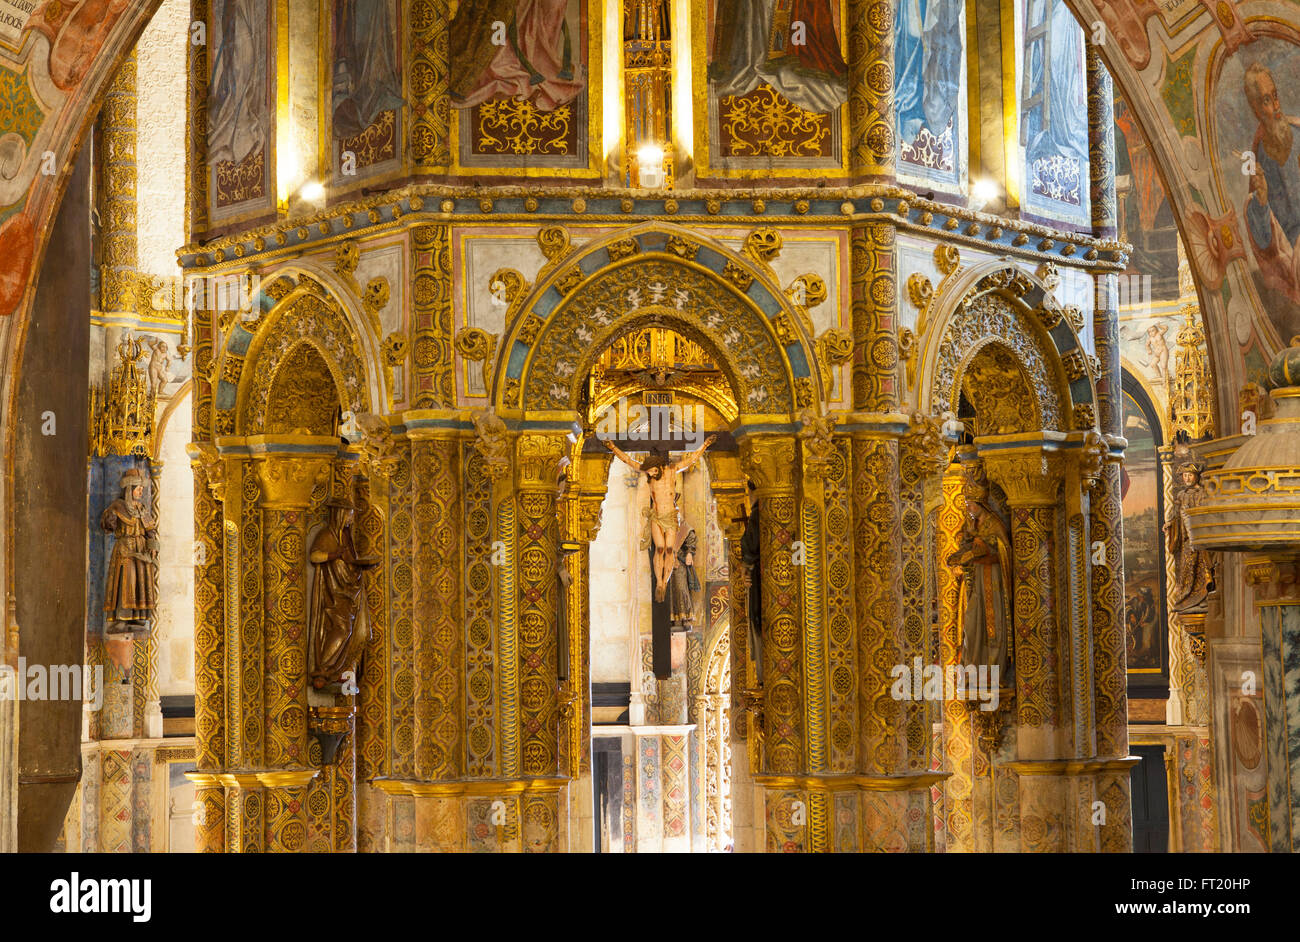 TOMAR, PORTUGAL - OCTOBER 07, 2015: Crucifix in Convent of the Order of Christ. Stock Photo